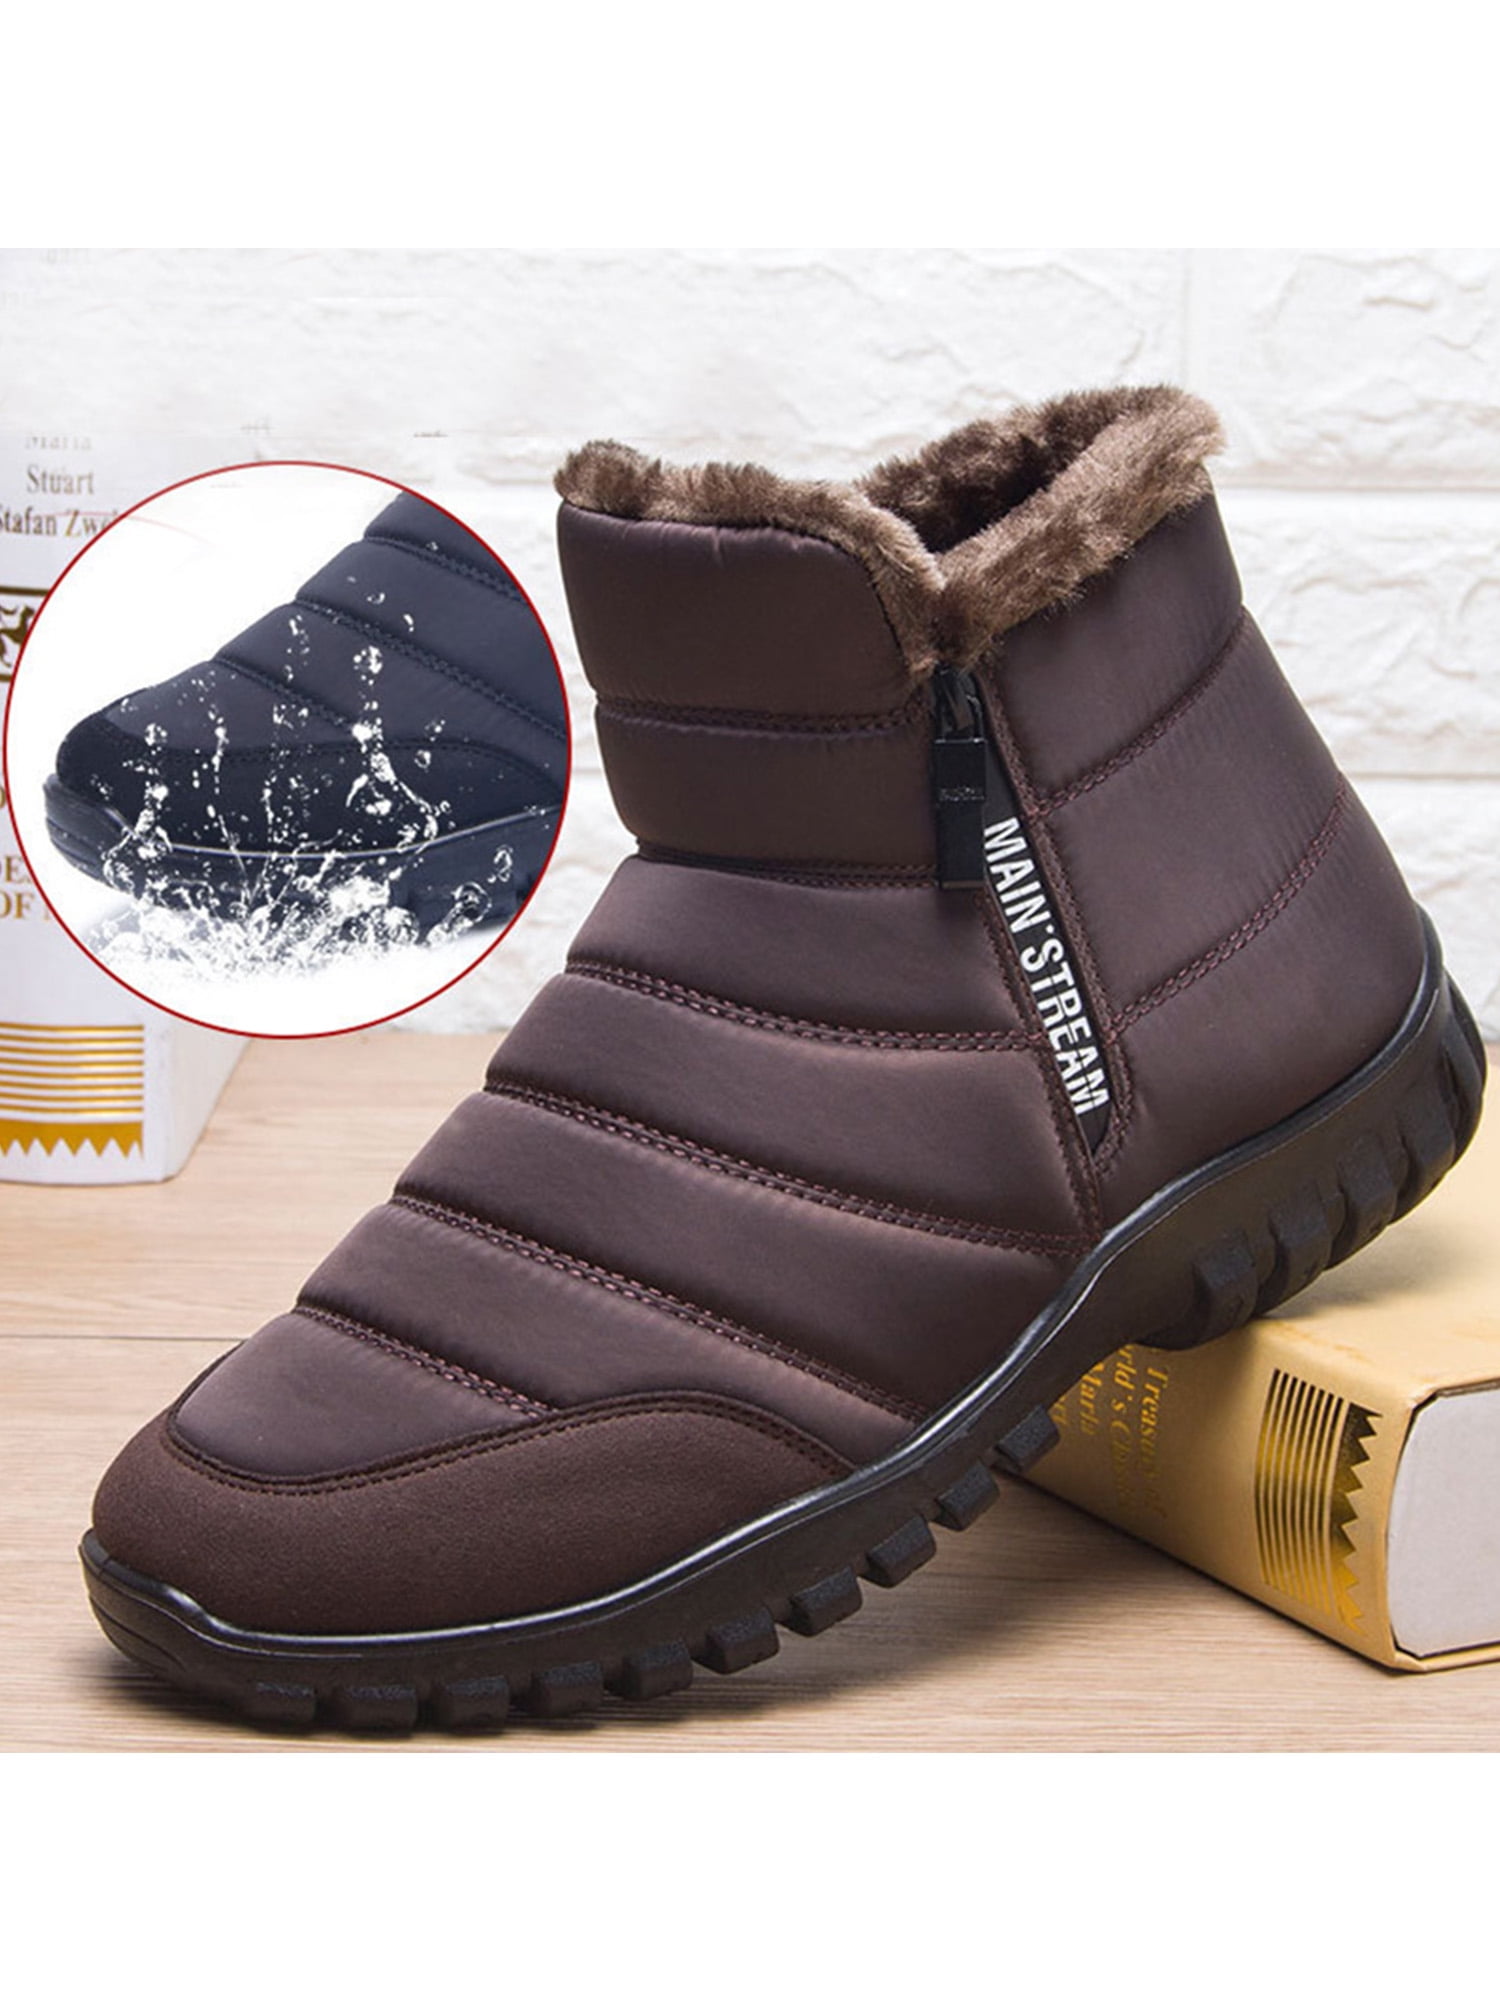 High Top Leather Shoes Winter Men Snow Boots Suede Ankle Sneakers Fur Lined Warm 